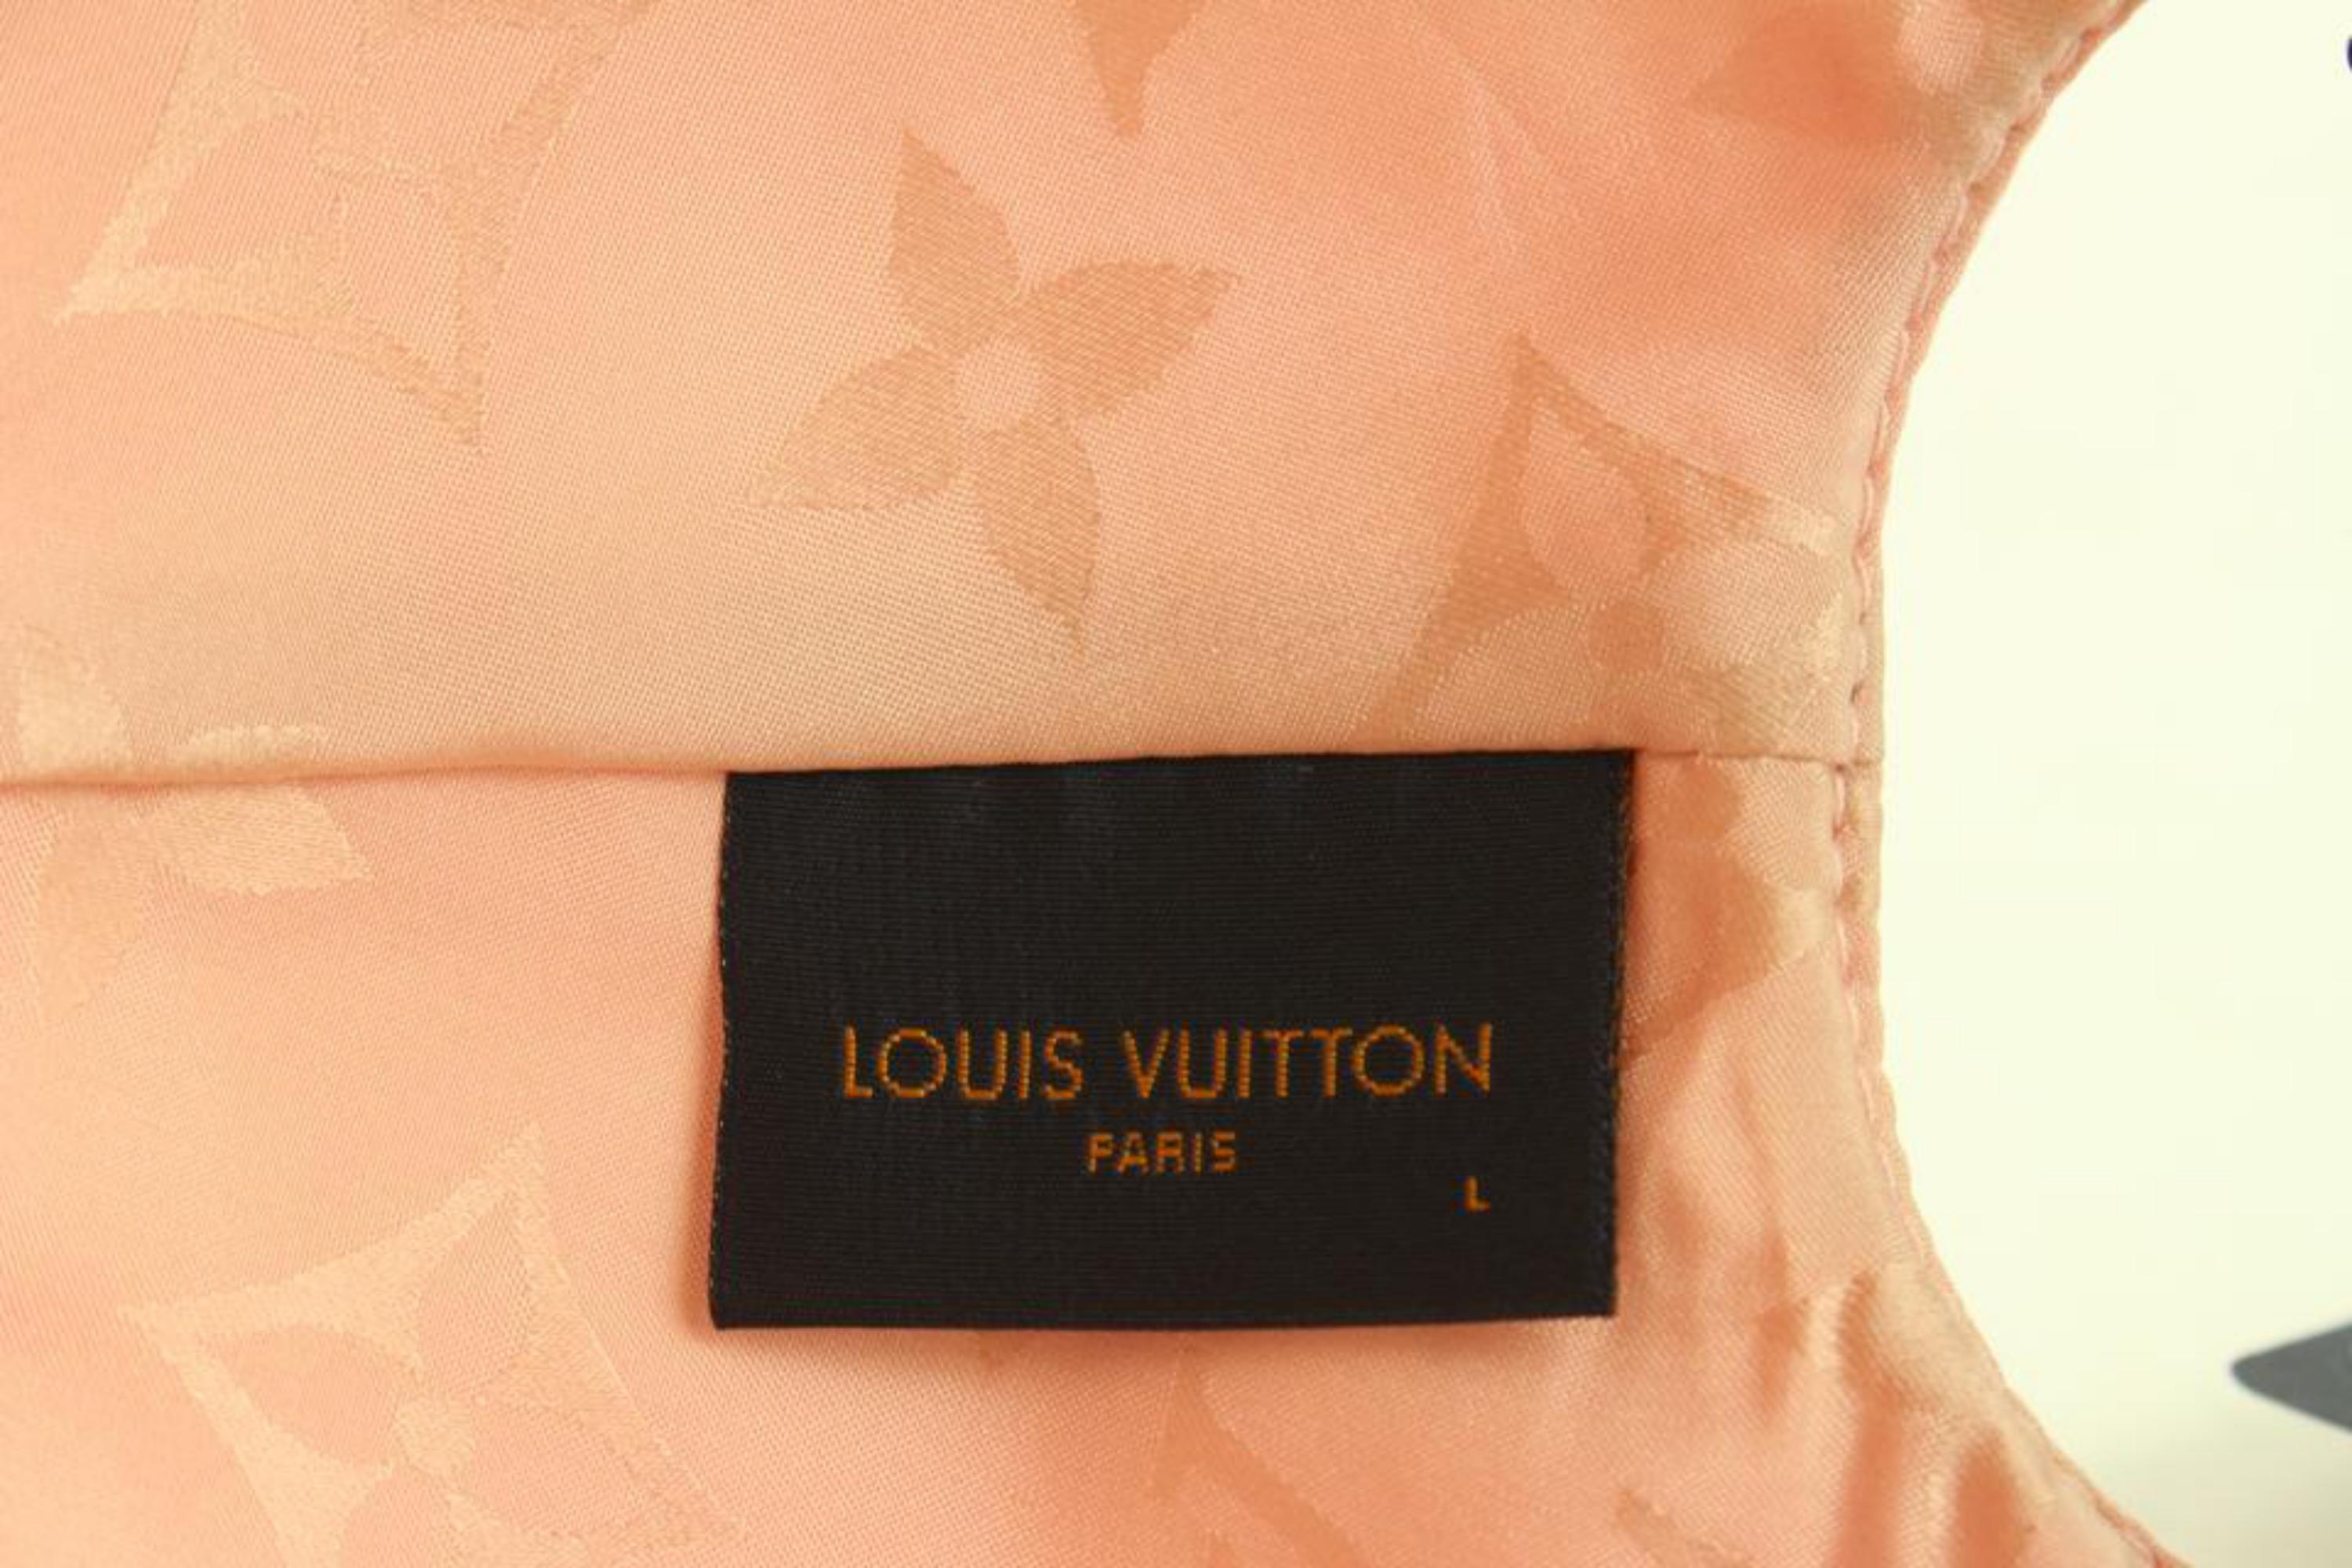 Louis Vuitton Large Pink Monogram Cap Ous Pas Wild at Heart Baseball Hat 0LV110
Date Code/Serial Number: AL0261 M00423
Made In: Italy
Measurements: Length:  7.5